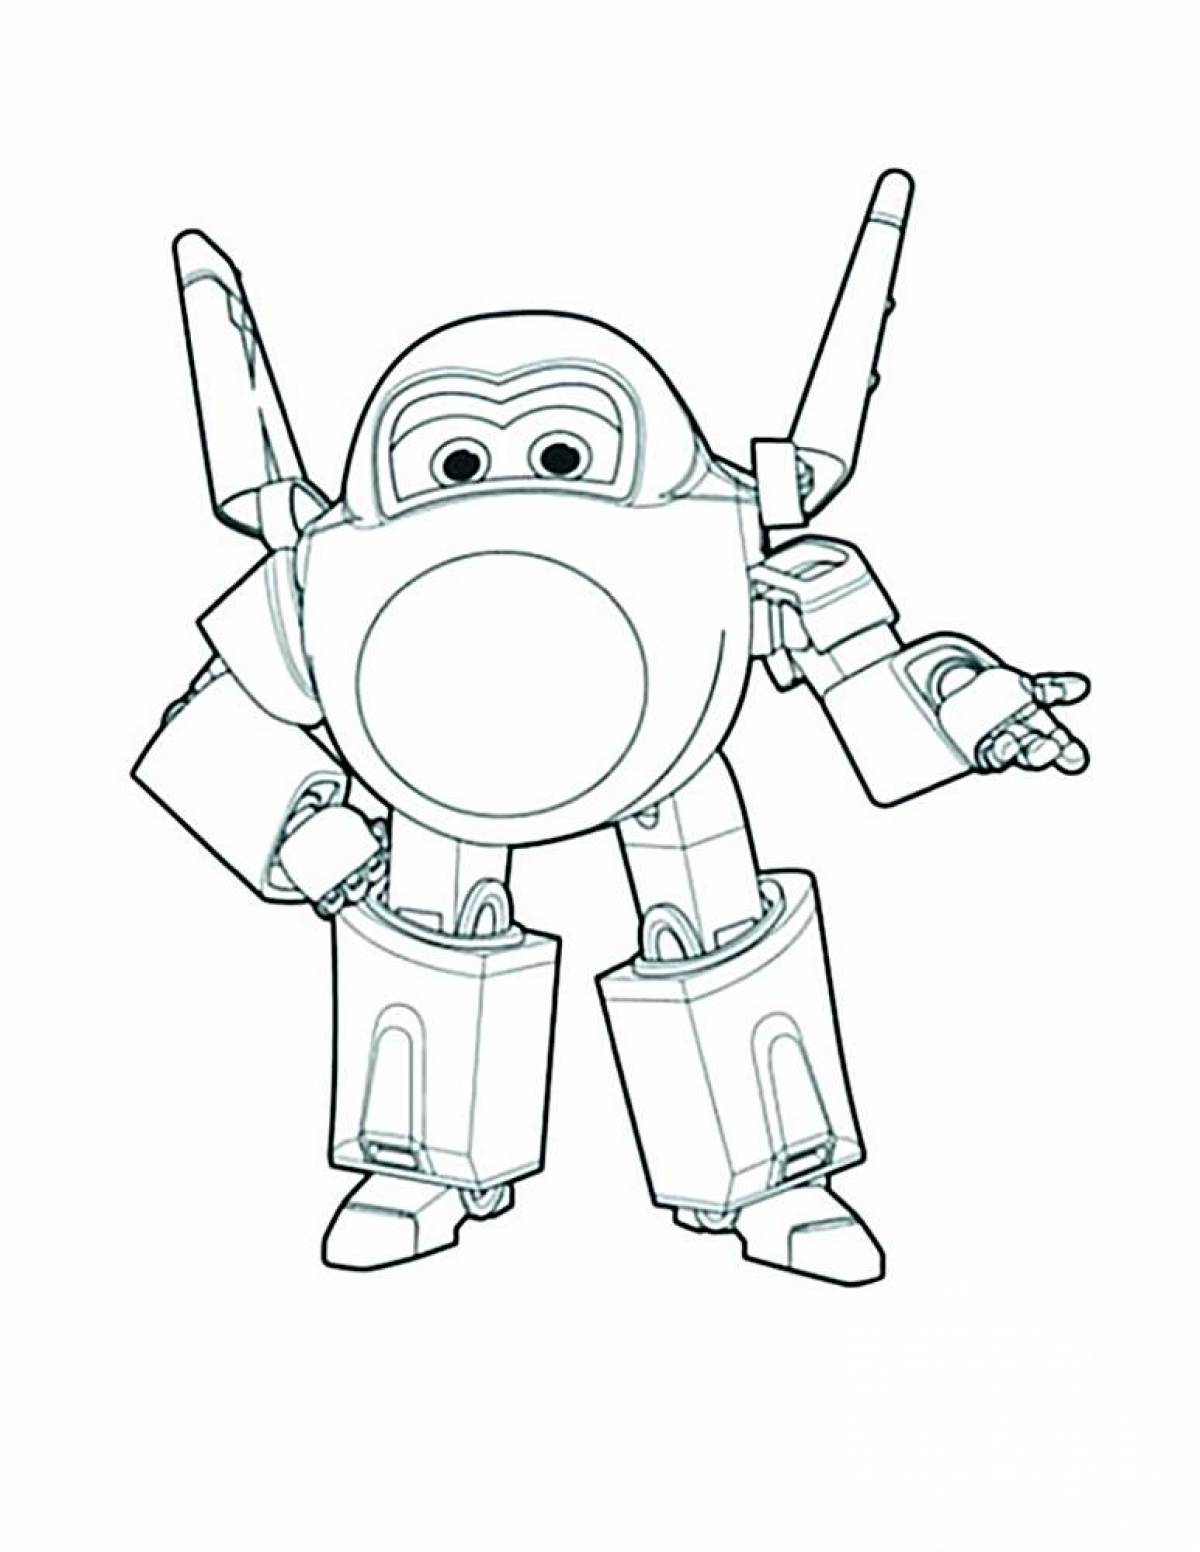 Live coloring super wings for kids